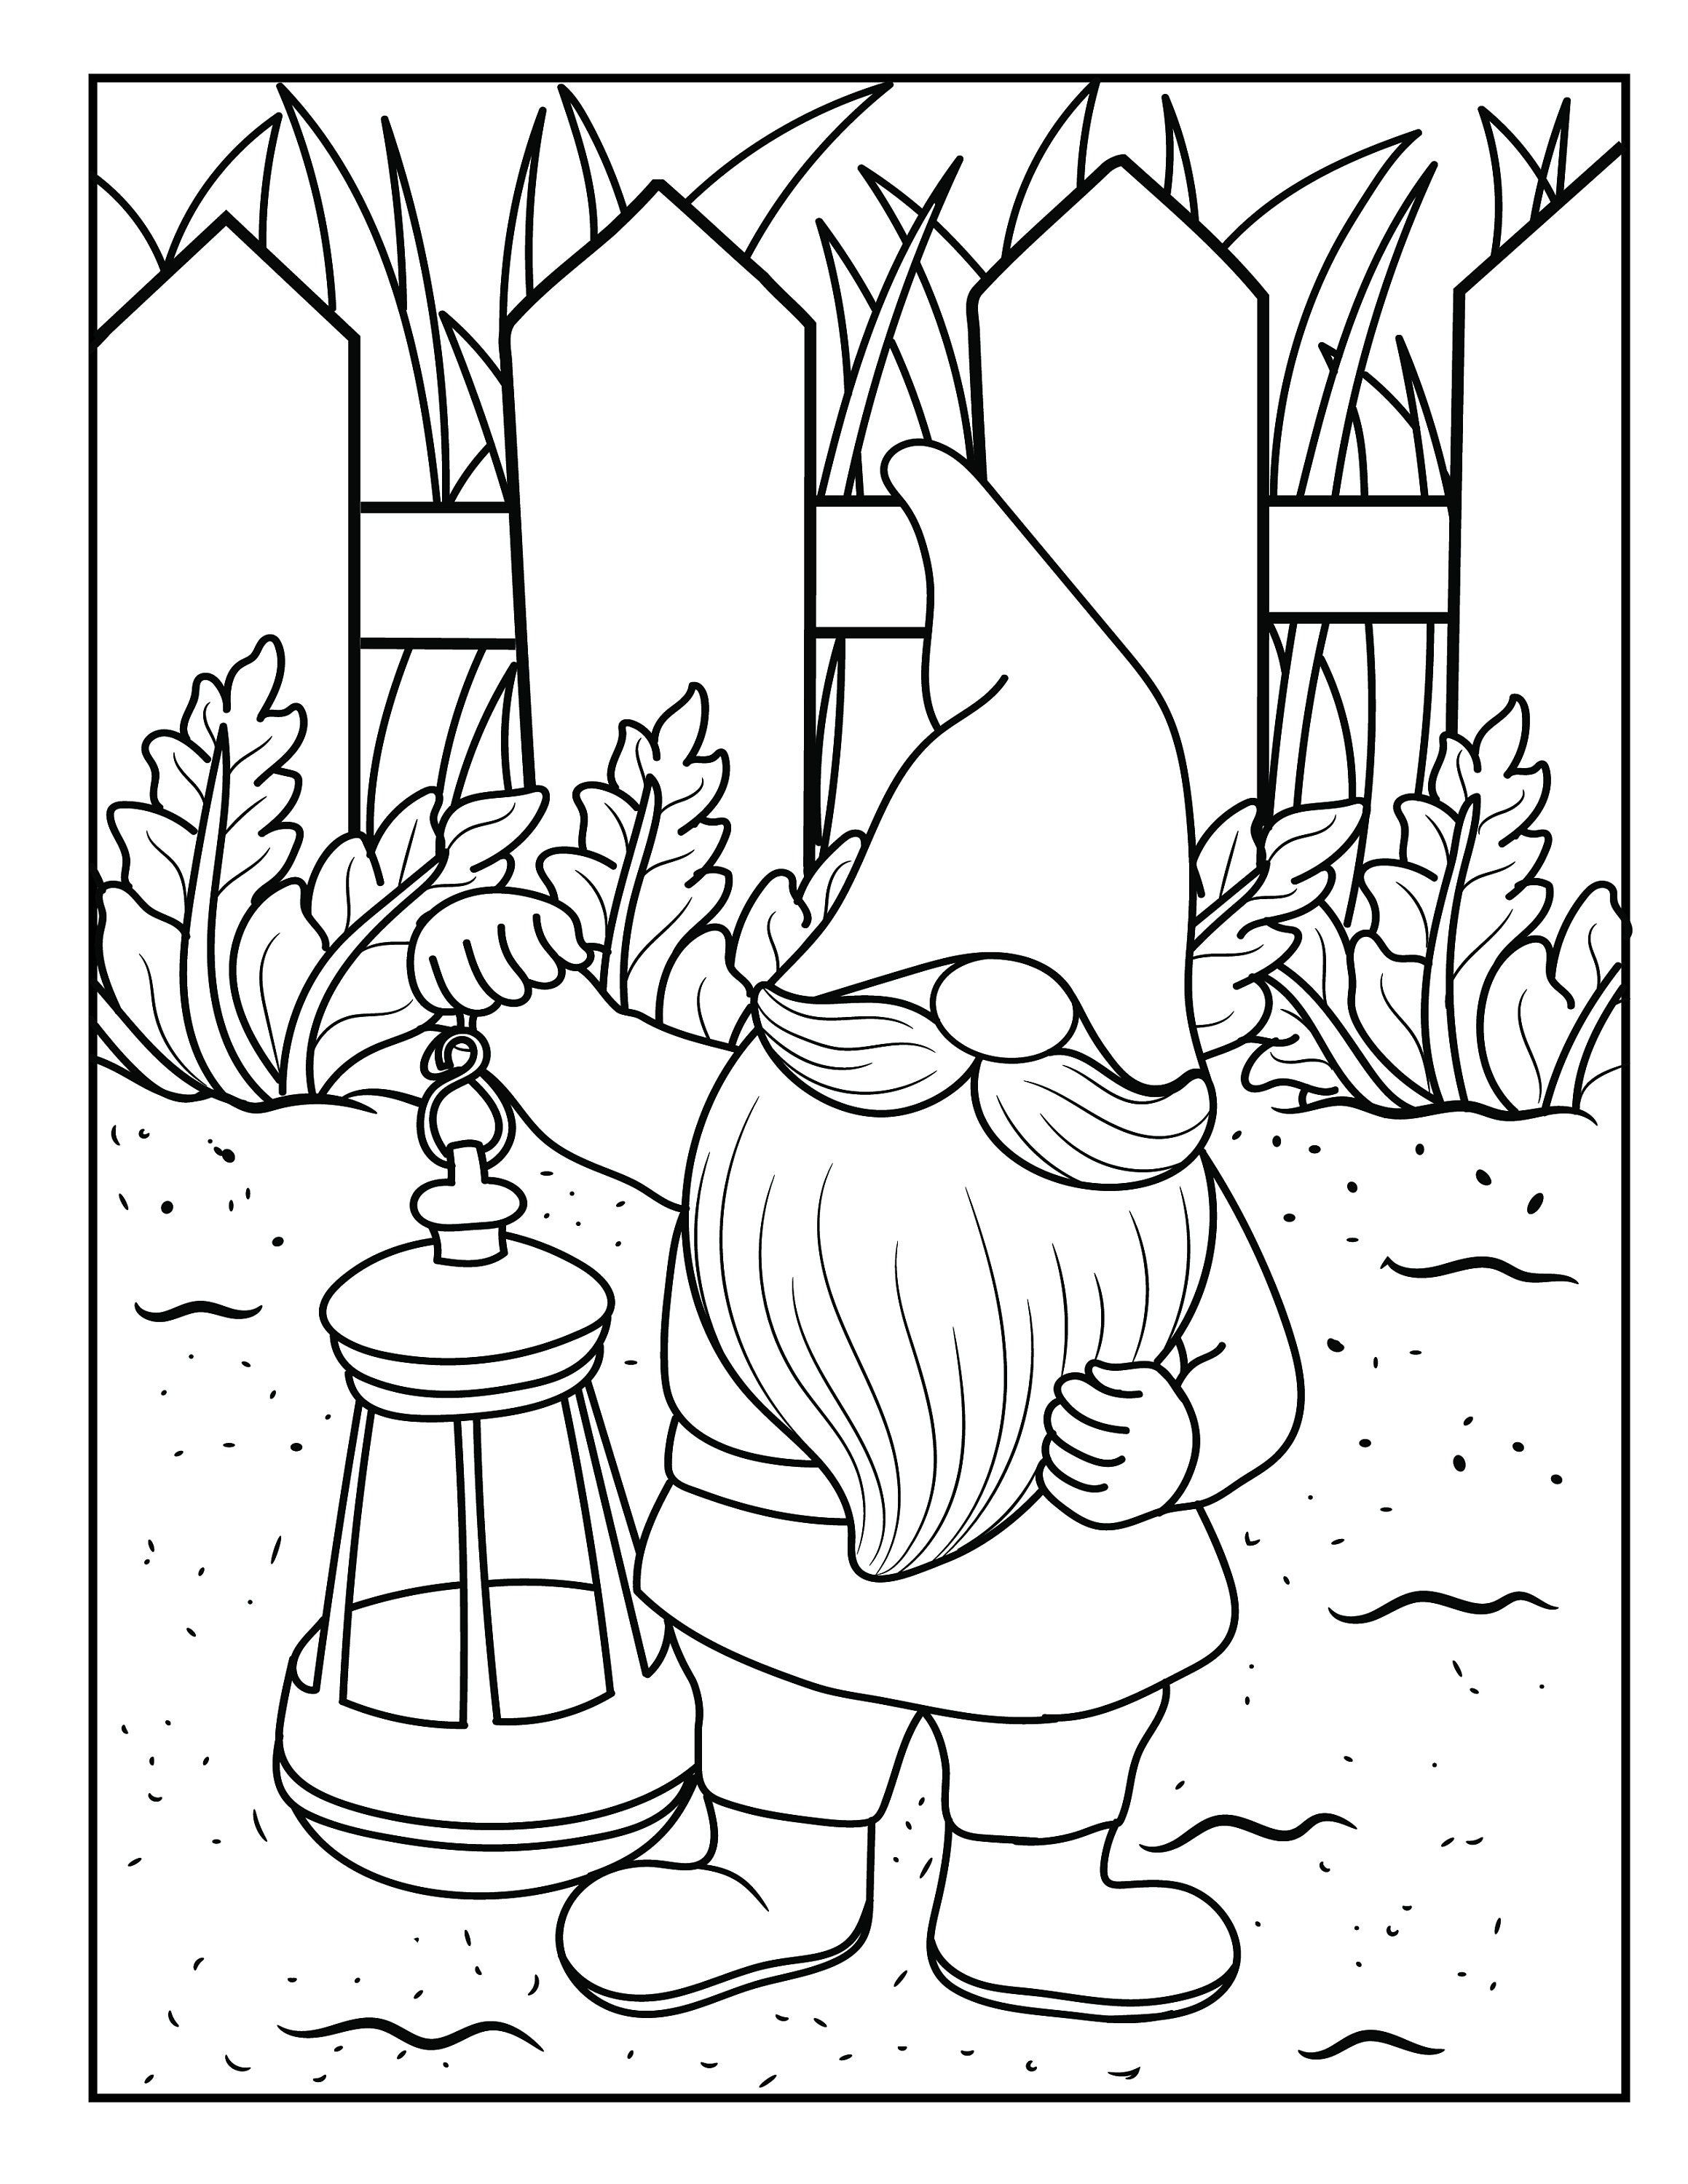 Printable gnome garden coloring pages for adults